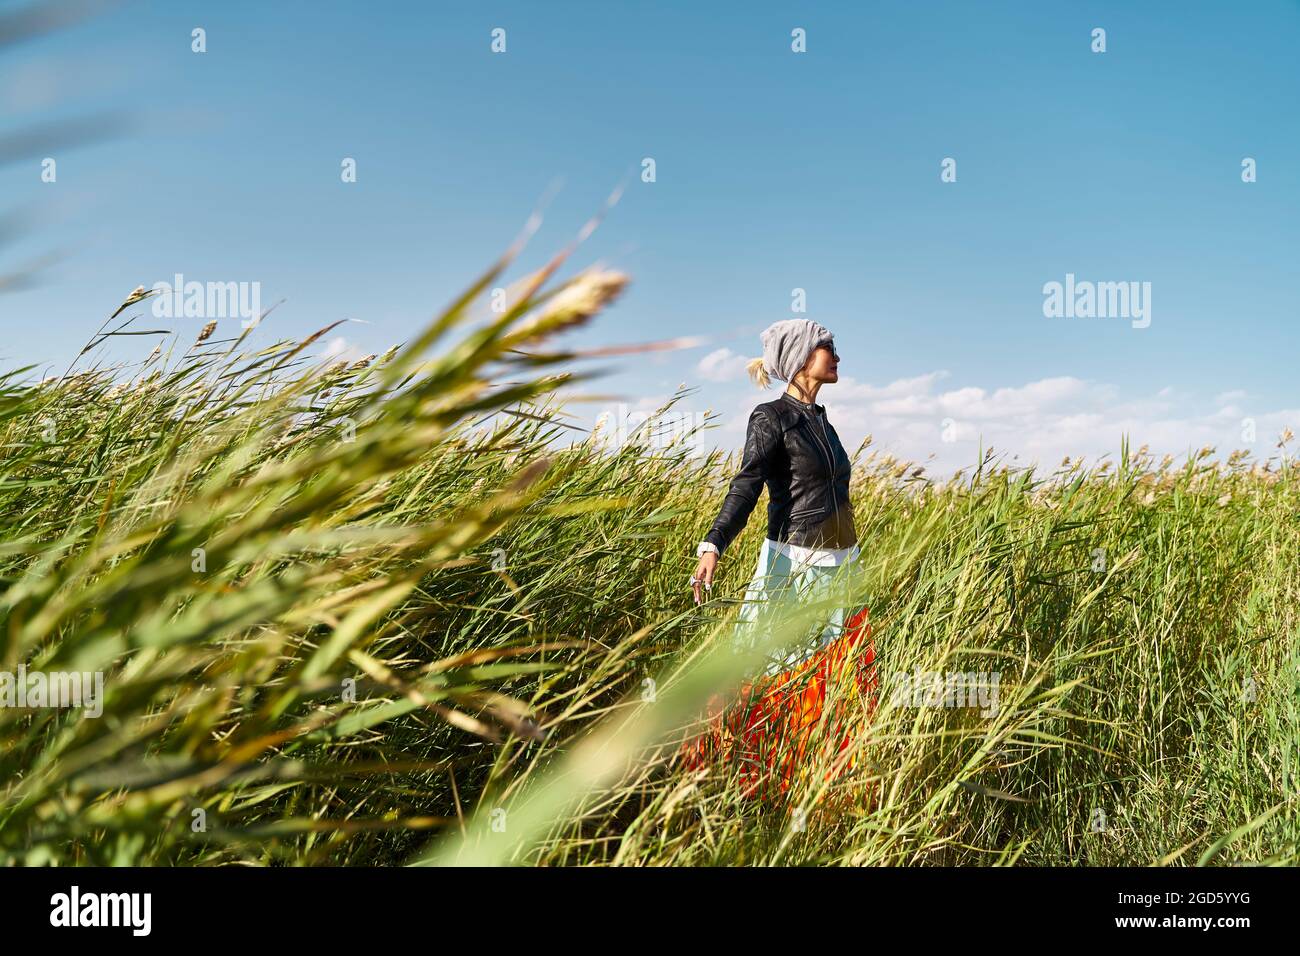 asian woman enjoying fresh air and sunlight in a field of reeds Stock Photo